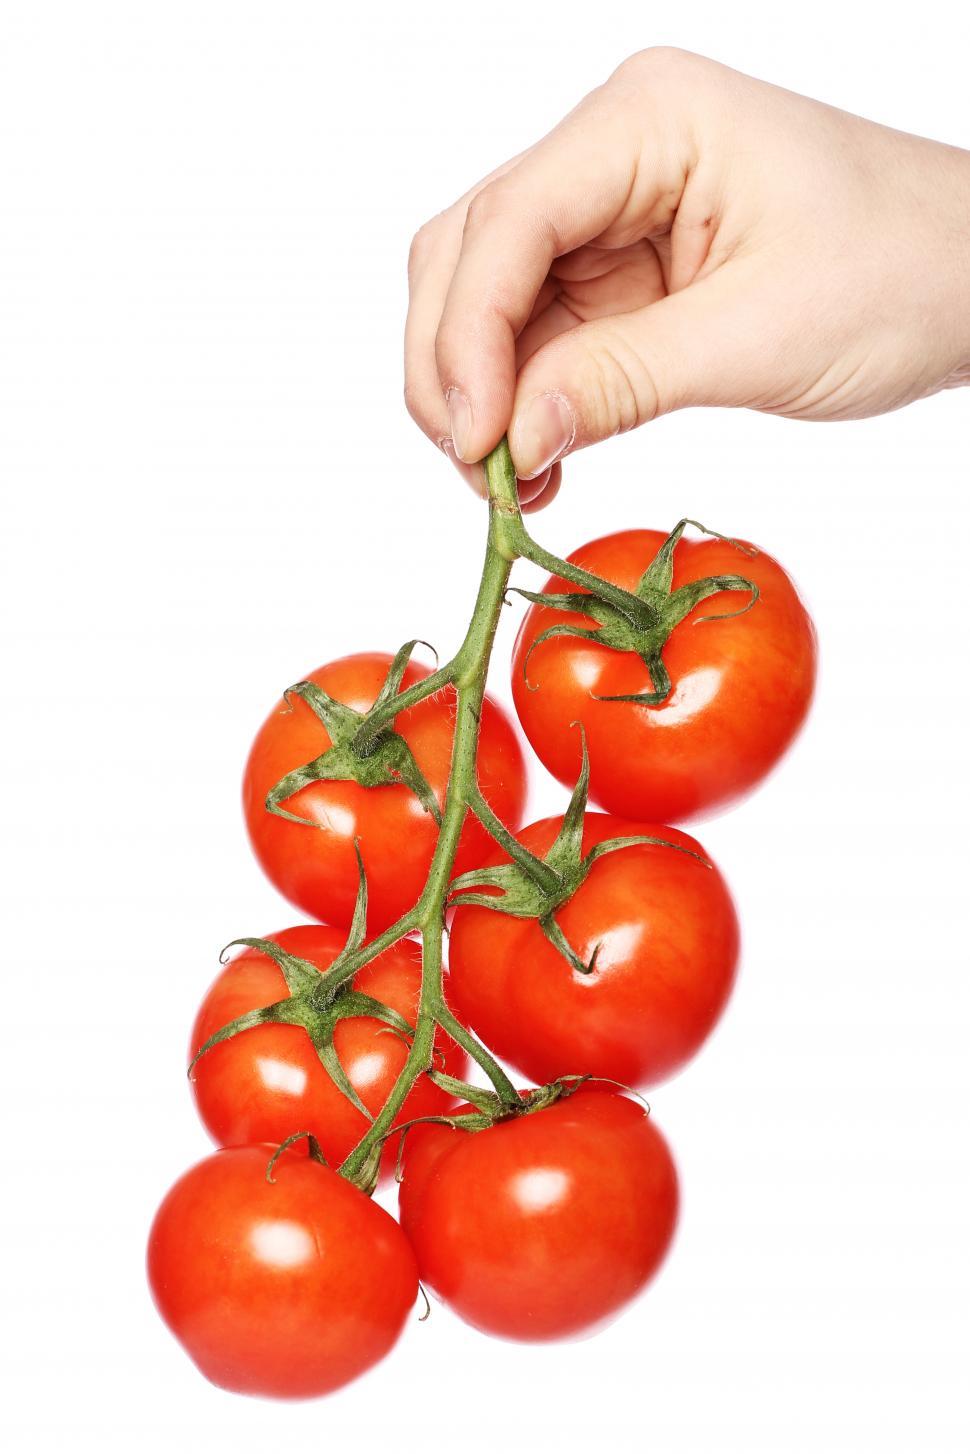 Free Image of Tomatoes on the vine over white background 